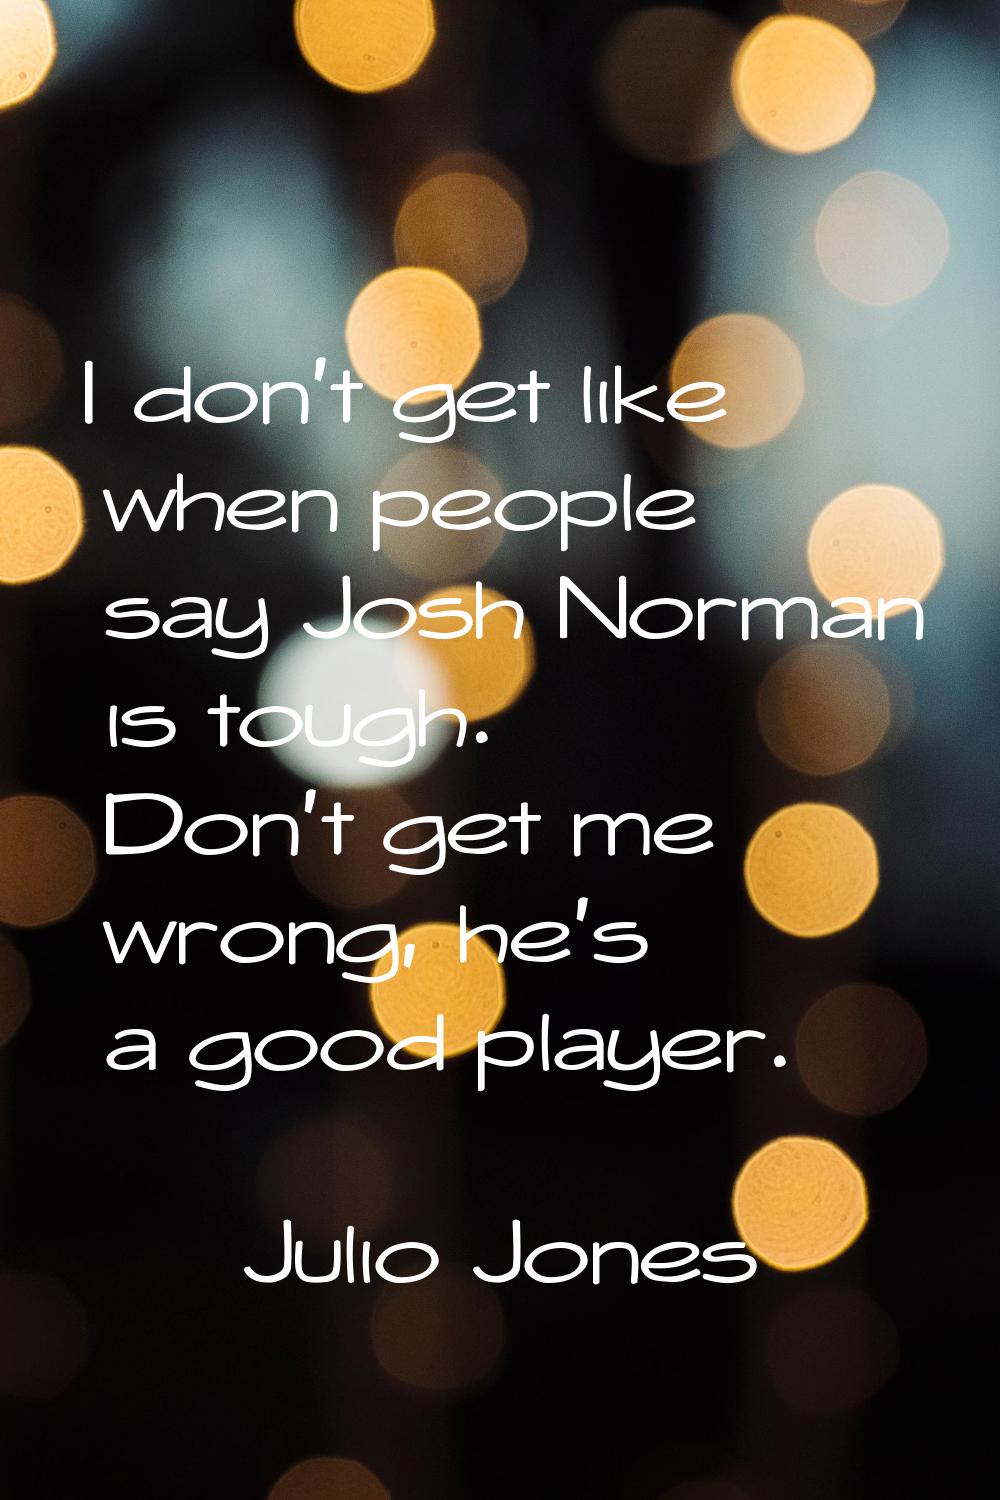 I don't get like when people say Josh Norman is tough. Don't get me wrong, he's a good player.